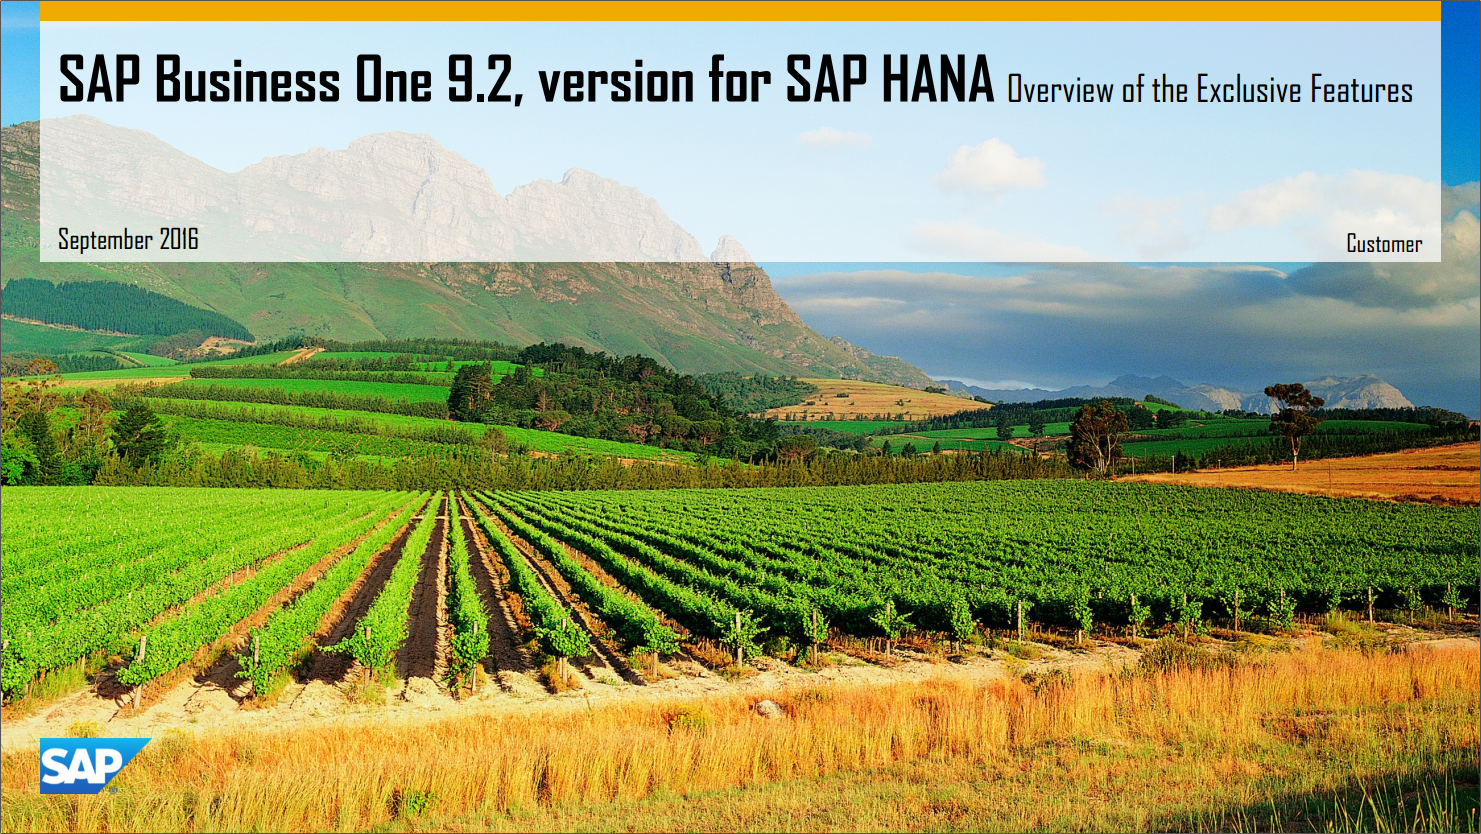 SAP Business One 9.2, version for SAP HANA Exclusive Features